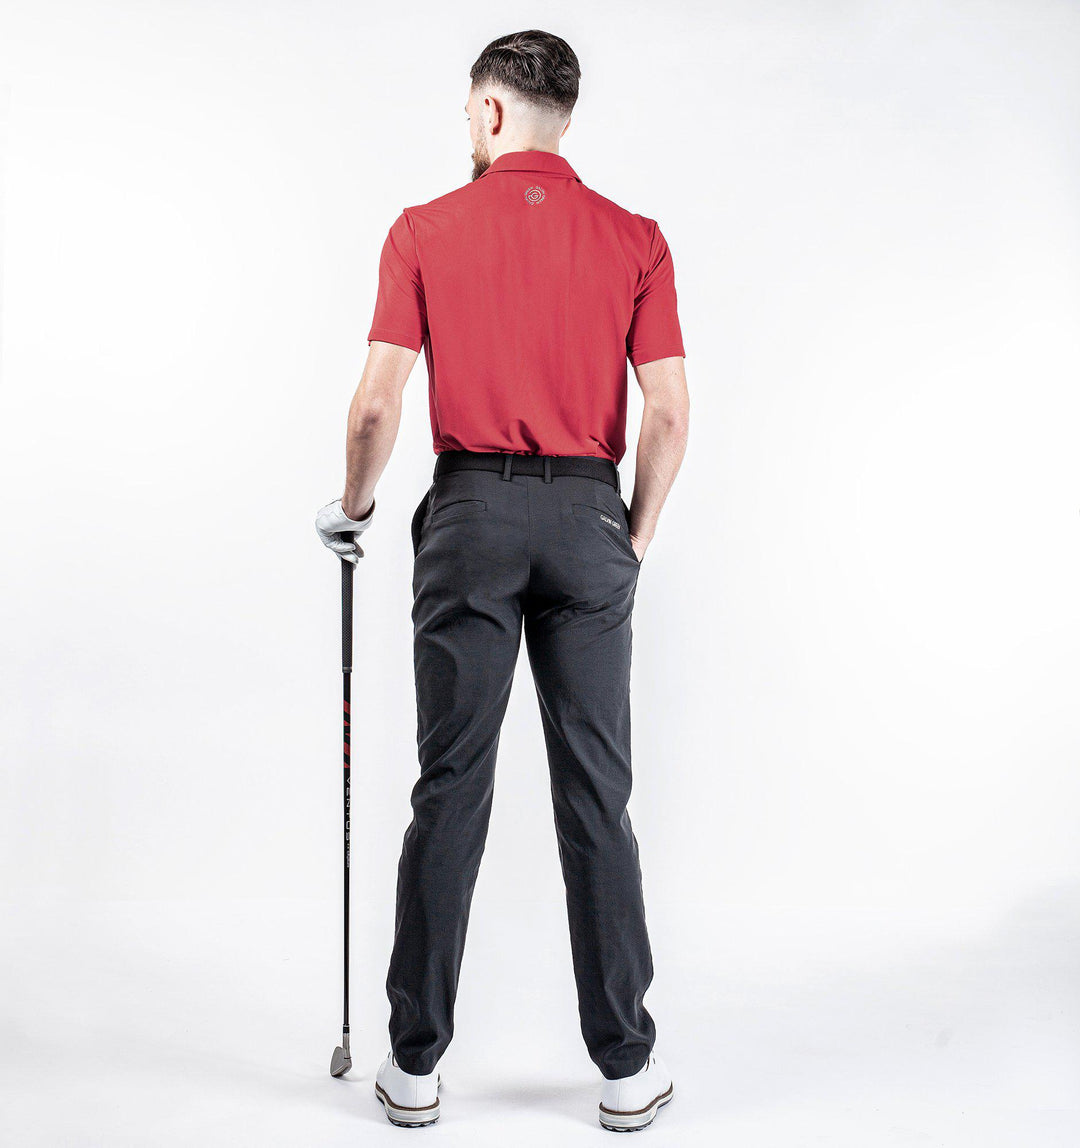 Milan is a Breathable short sleeve golf shirt for Men in the color Red(7)